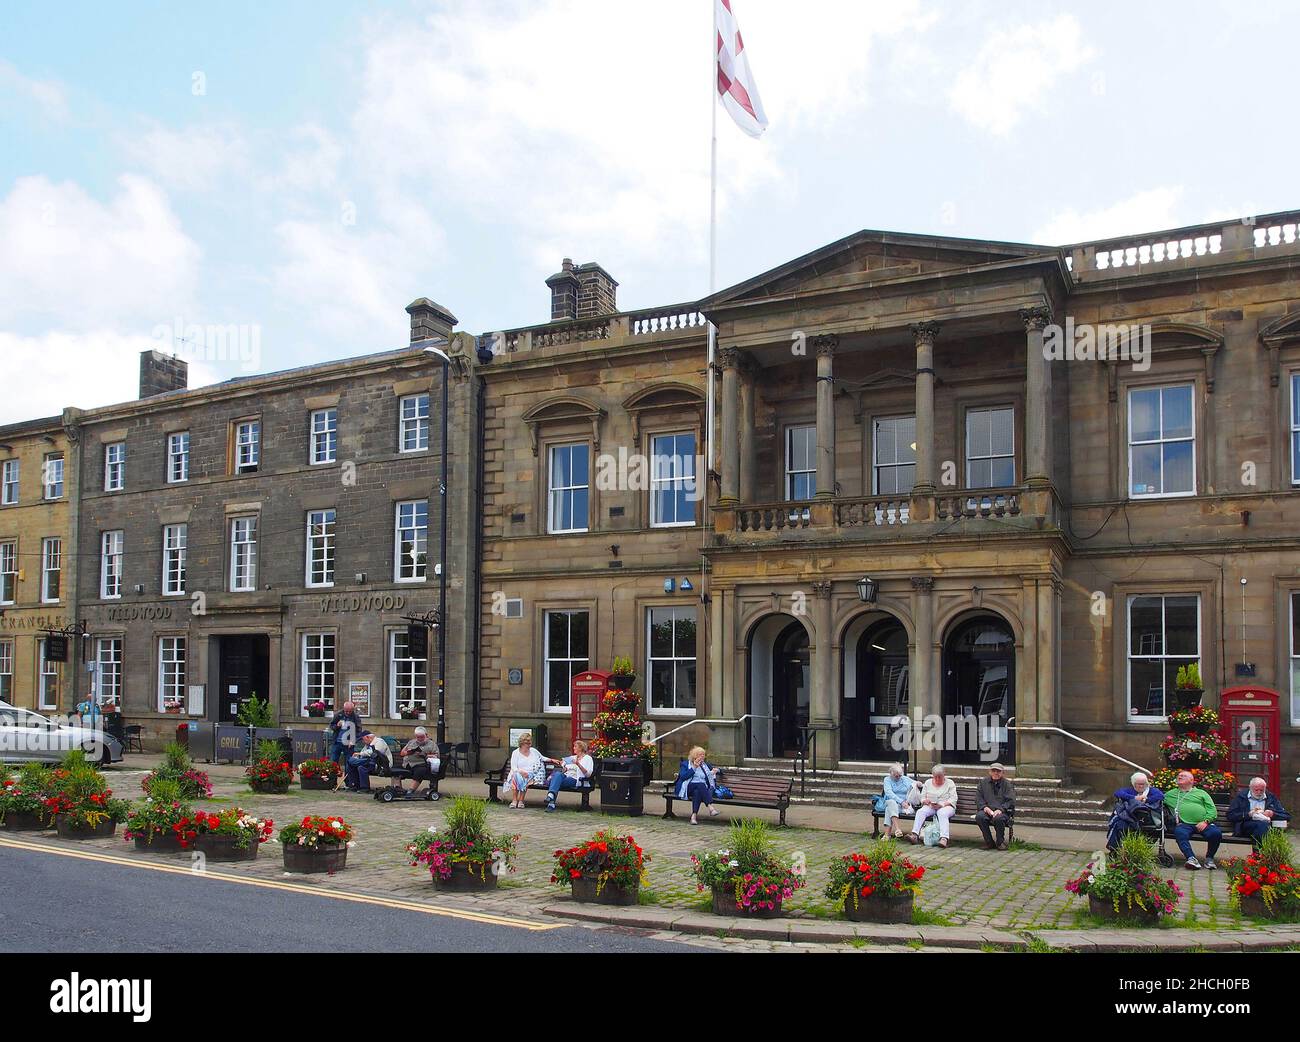 Senior citizens enjoying the sunshine sitting on benches outside Skipton town hall, North Yorkshire, England, with flowers in tubs in the foreground. Stock Photo